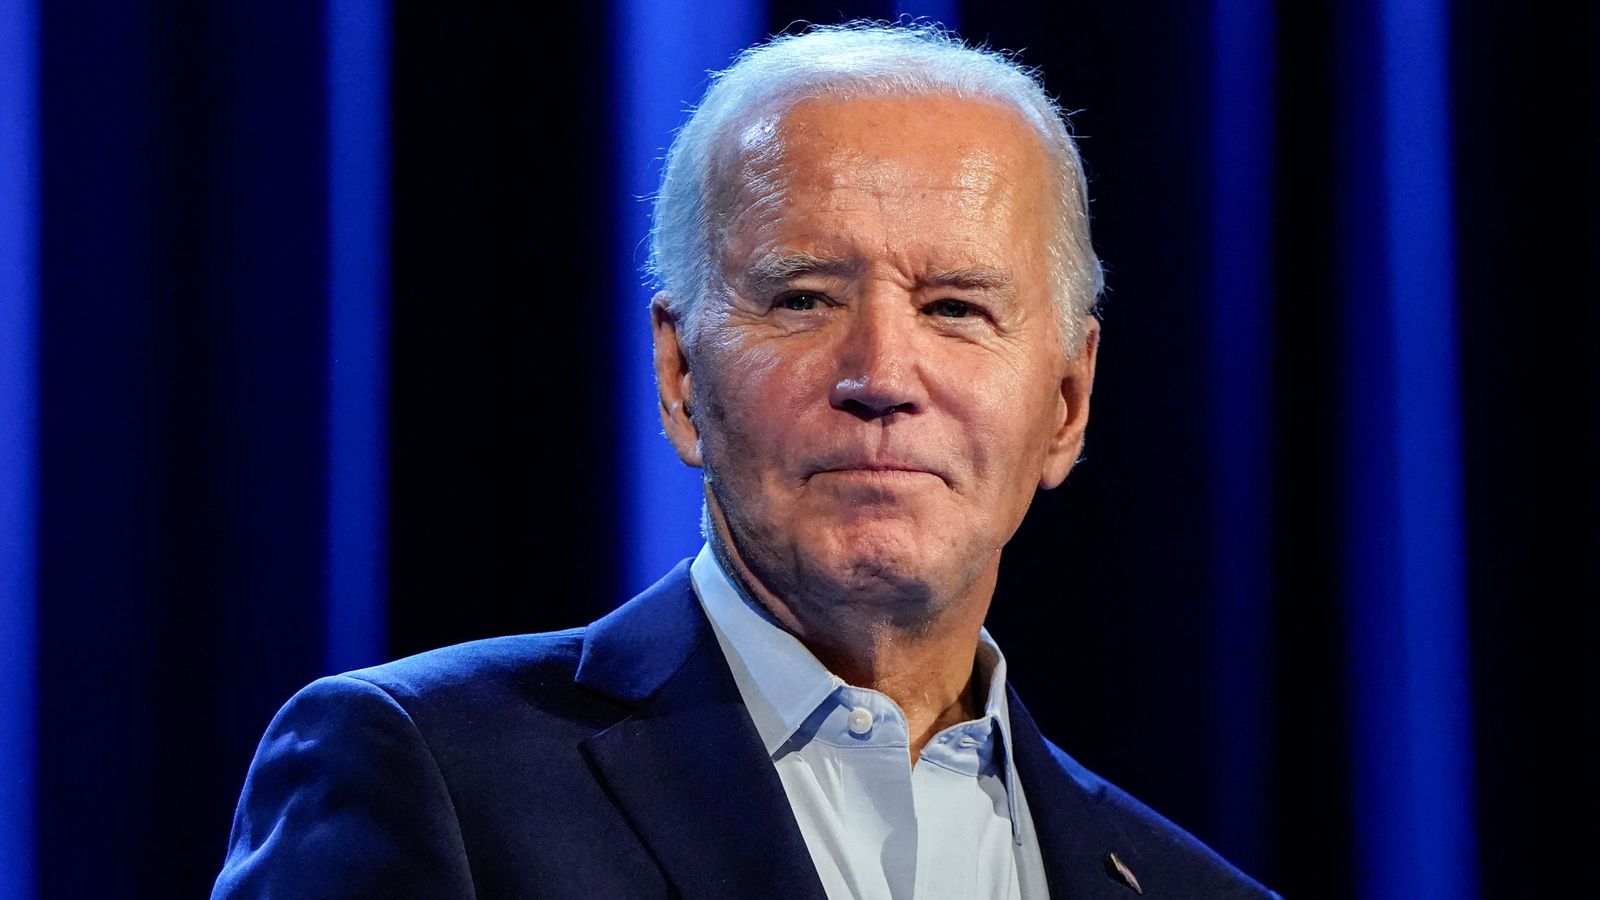 Joe Biden criticised by Trump campaign for declaring Transgender Day of